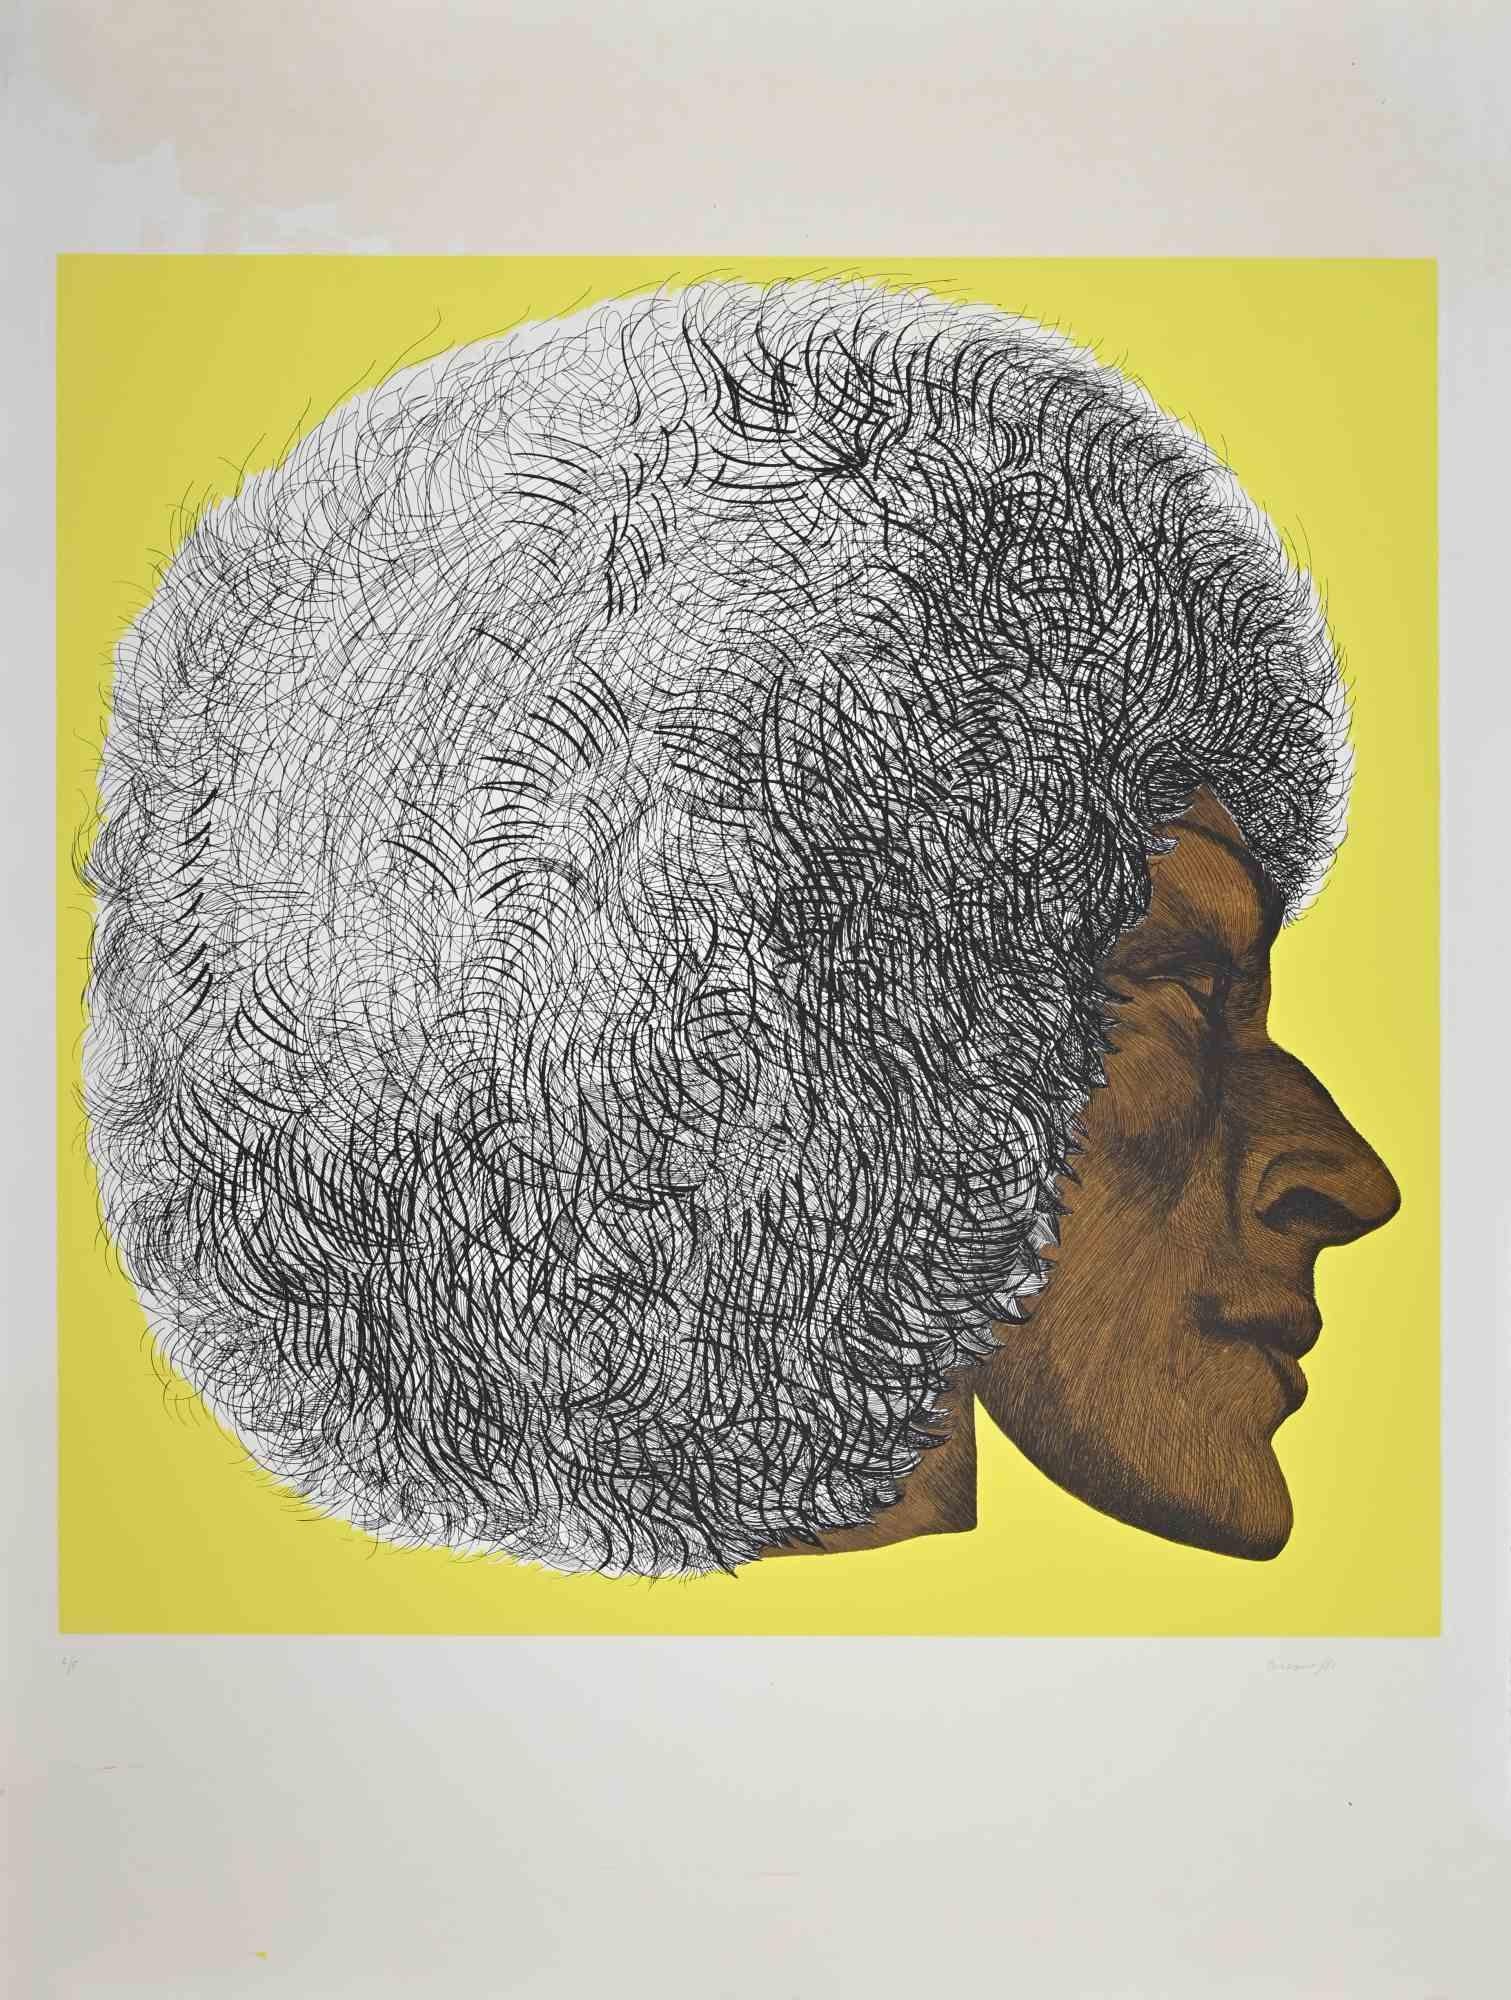 Profile Yellow II - Profilo giallo II is a contemporary artwork realized by Giacomo Porzano in 1972.

Hand signed and dated by artist with pencil.

Numbered on the lower margin. Edition of 2/5